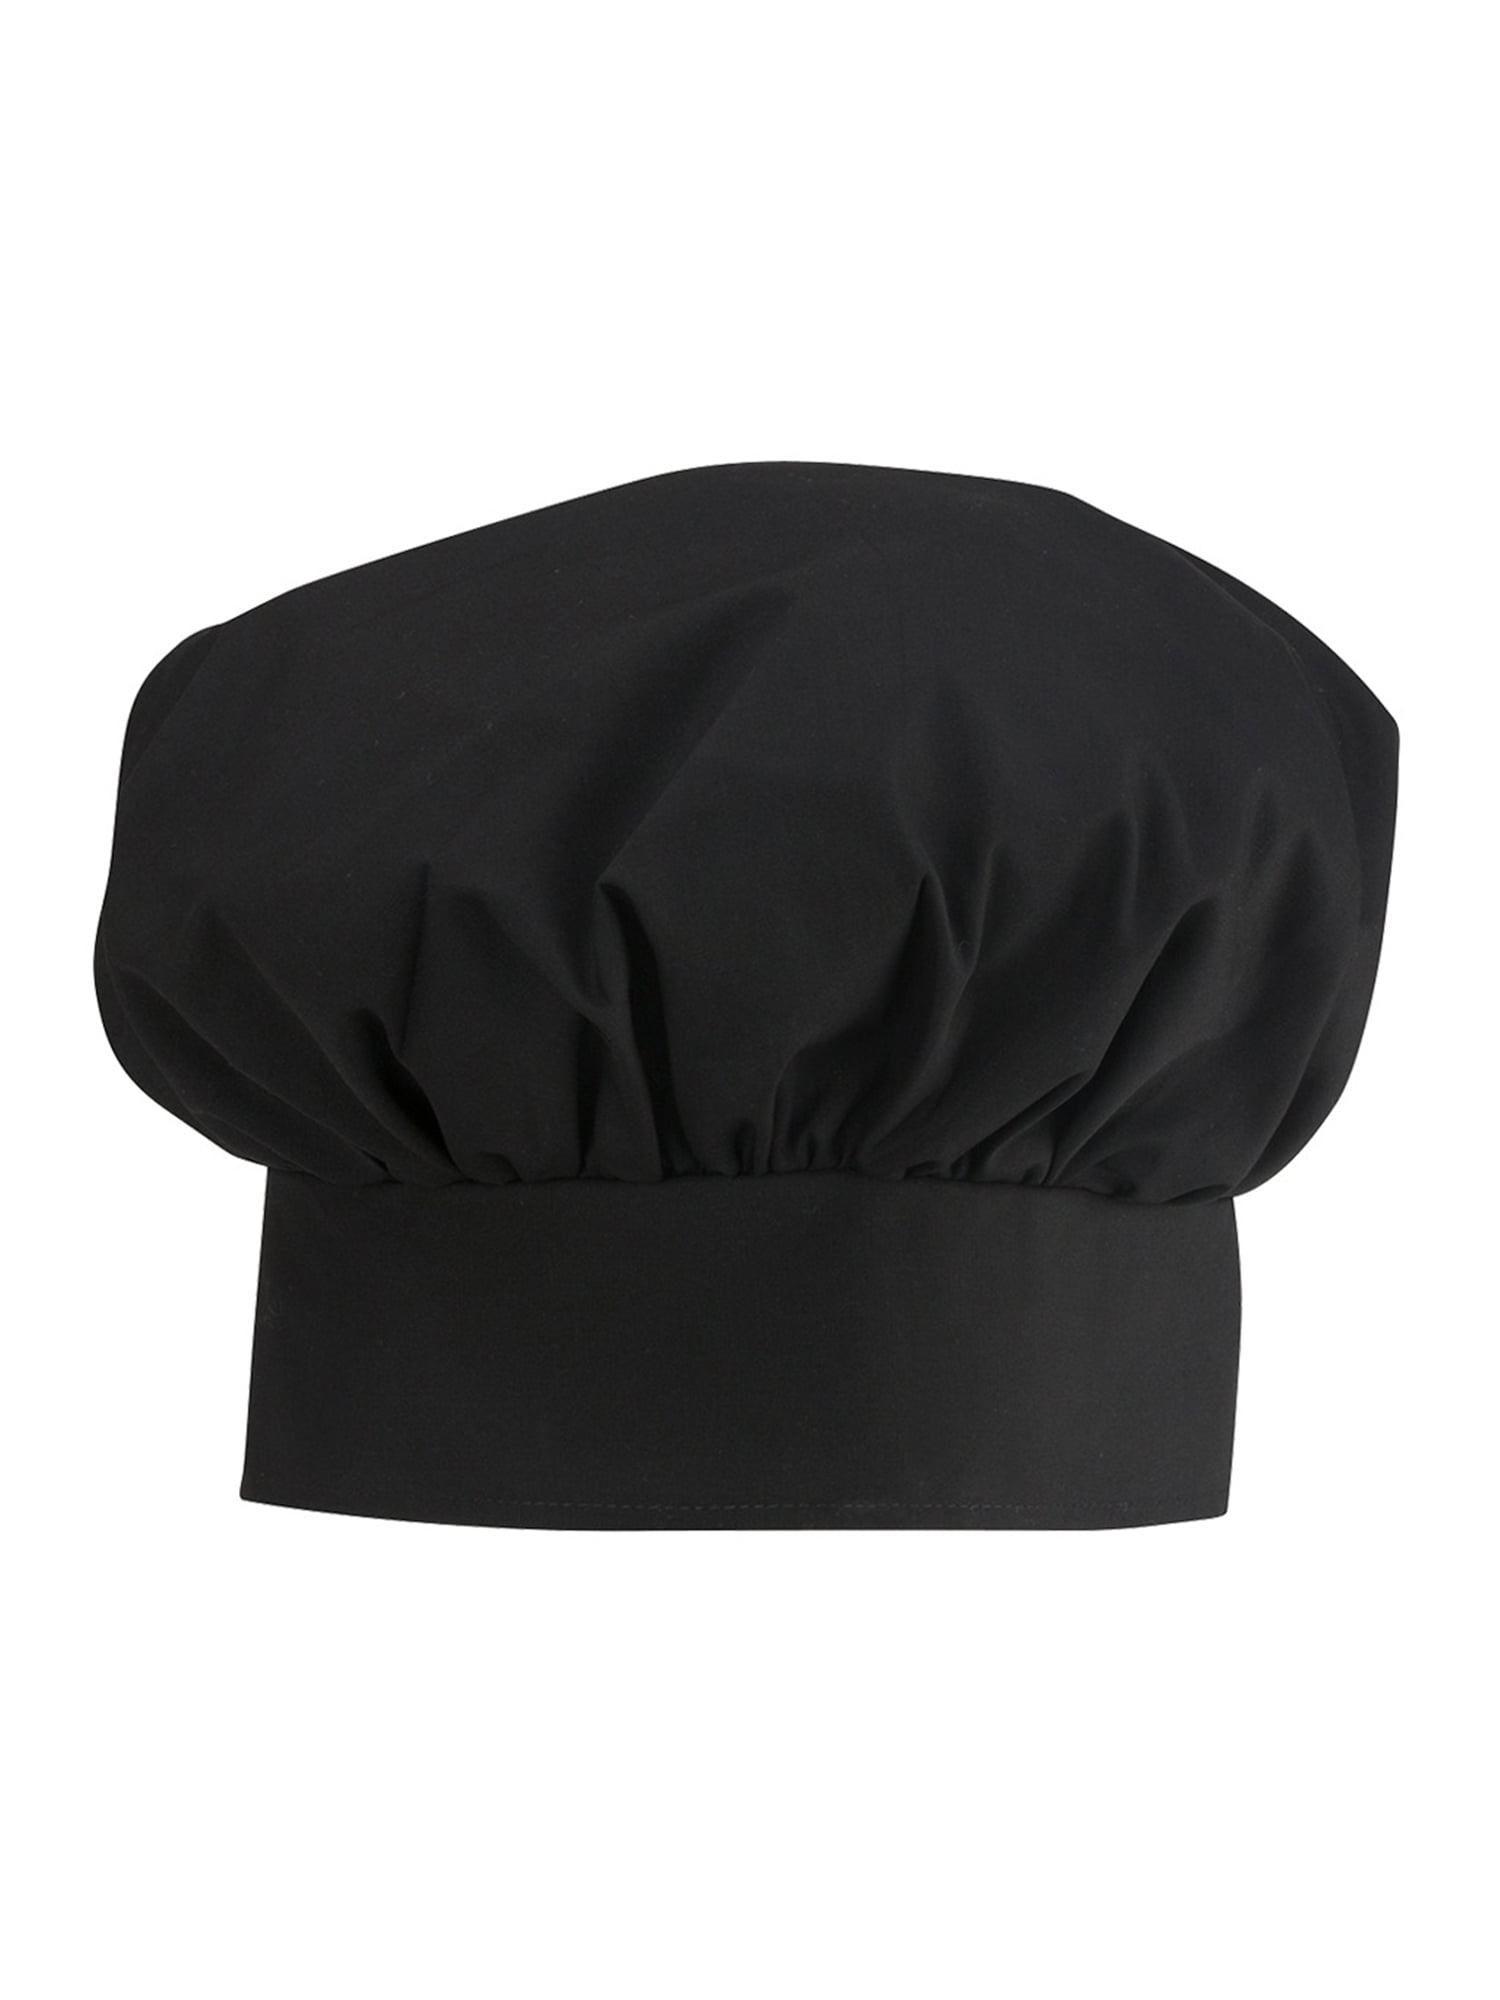 HIGHLIVING CHEFS SKULL CAP CHEF HAT PROFESSIONAL CATERING CHEF CAP 